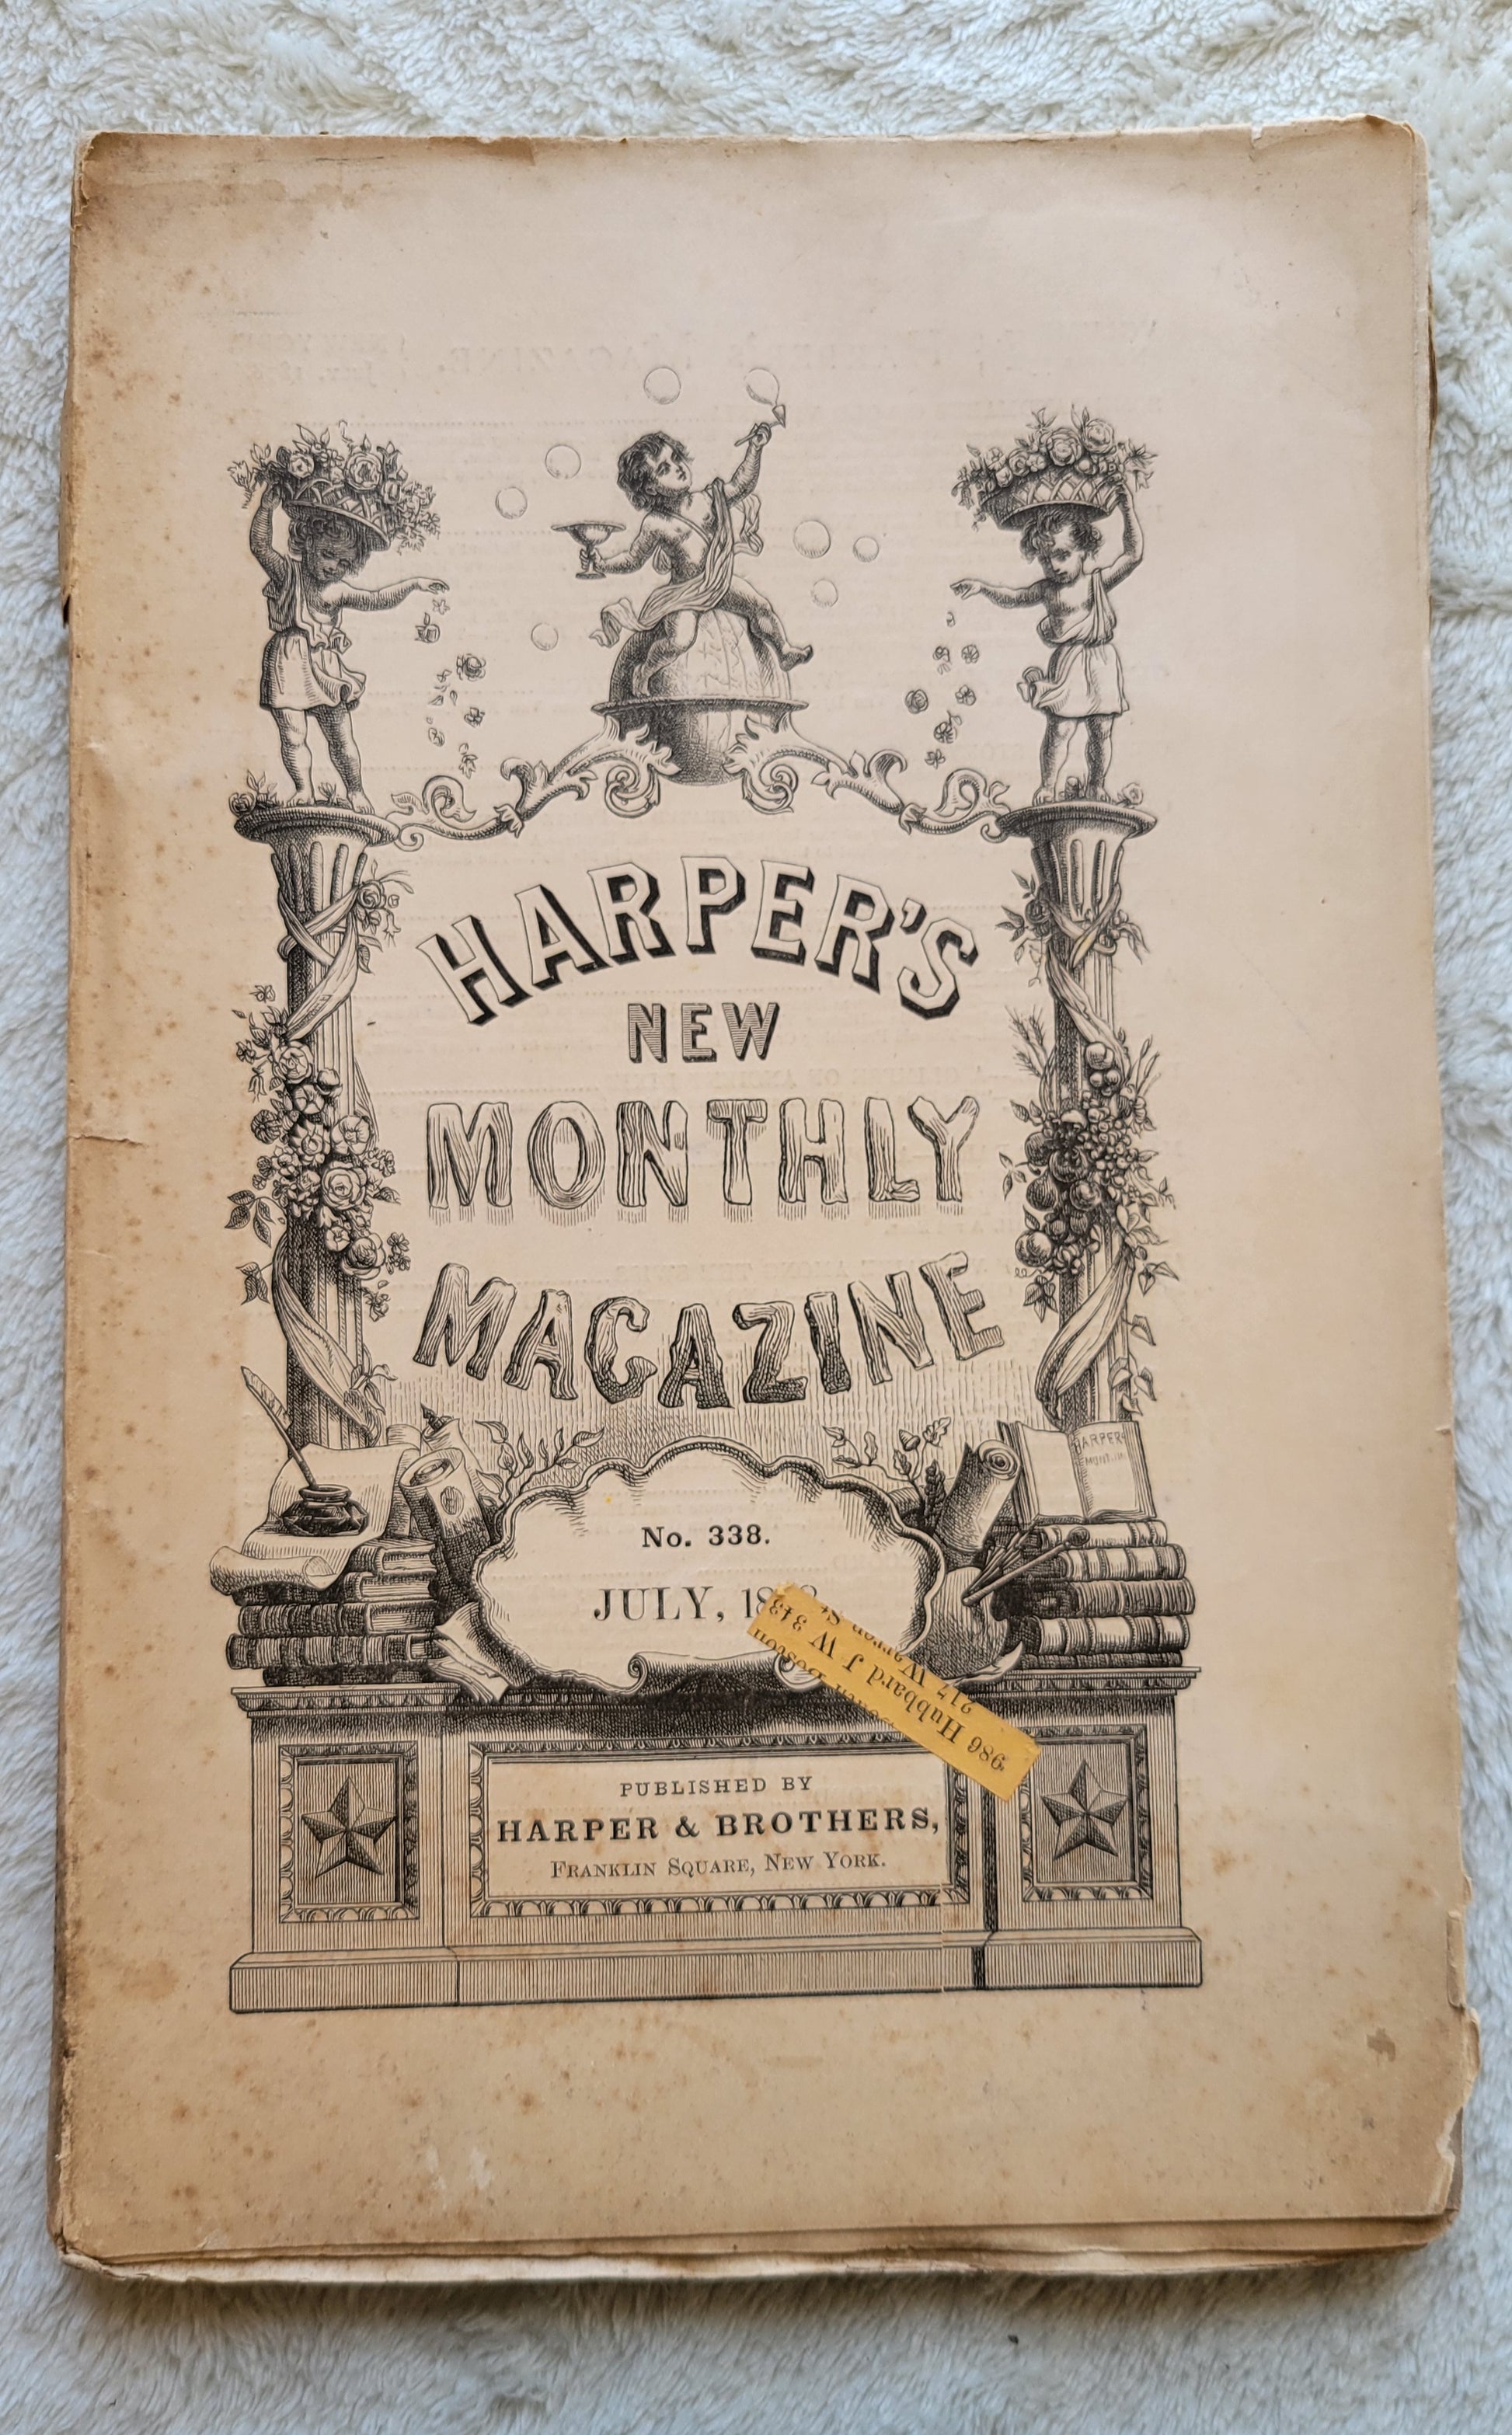 Antique magazine for sale, Volume 57 Number 338, July 1878 of Harper's New Monthly Magazine, published by Harper & Brothers, Franklin Square, New York. View of front cover.